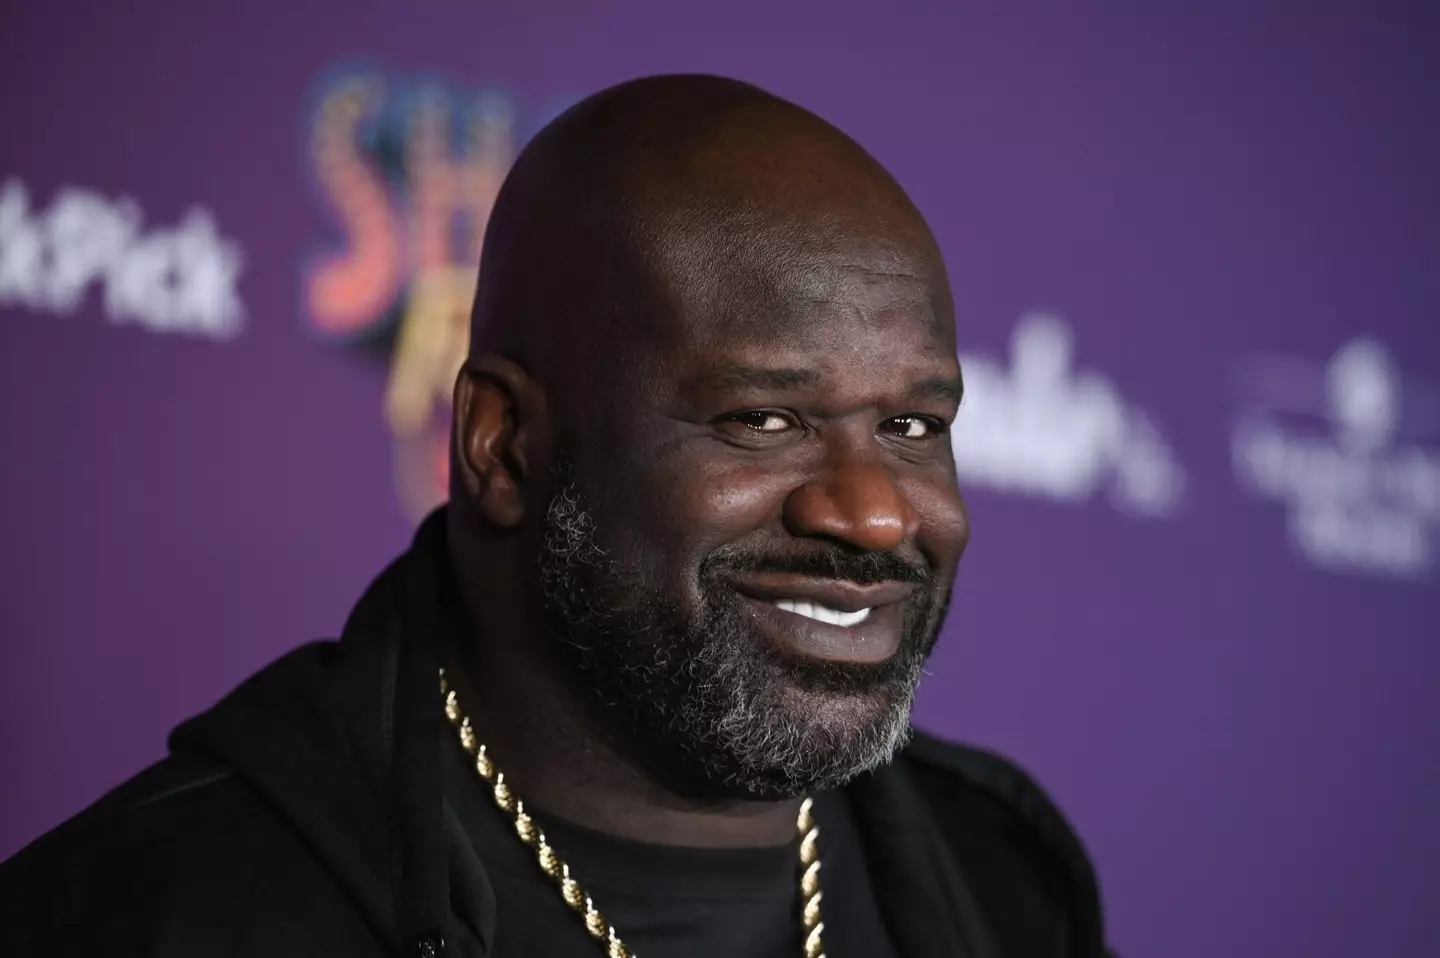 Shaq has one key rule if his kids want to see their inheritance.